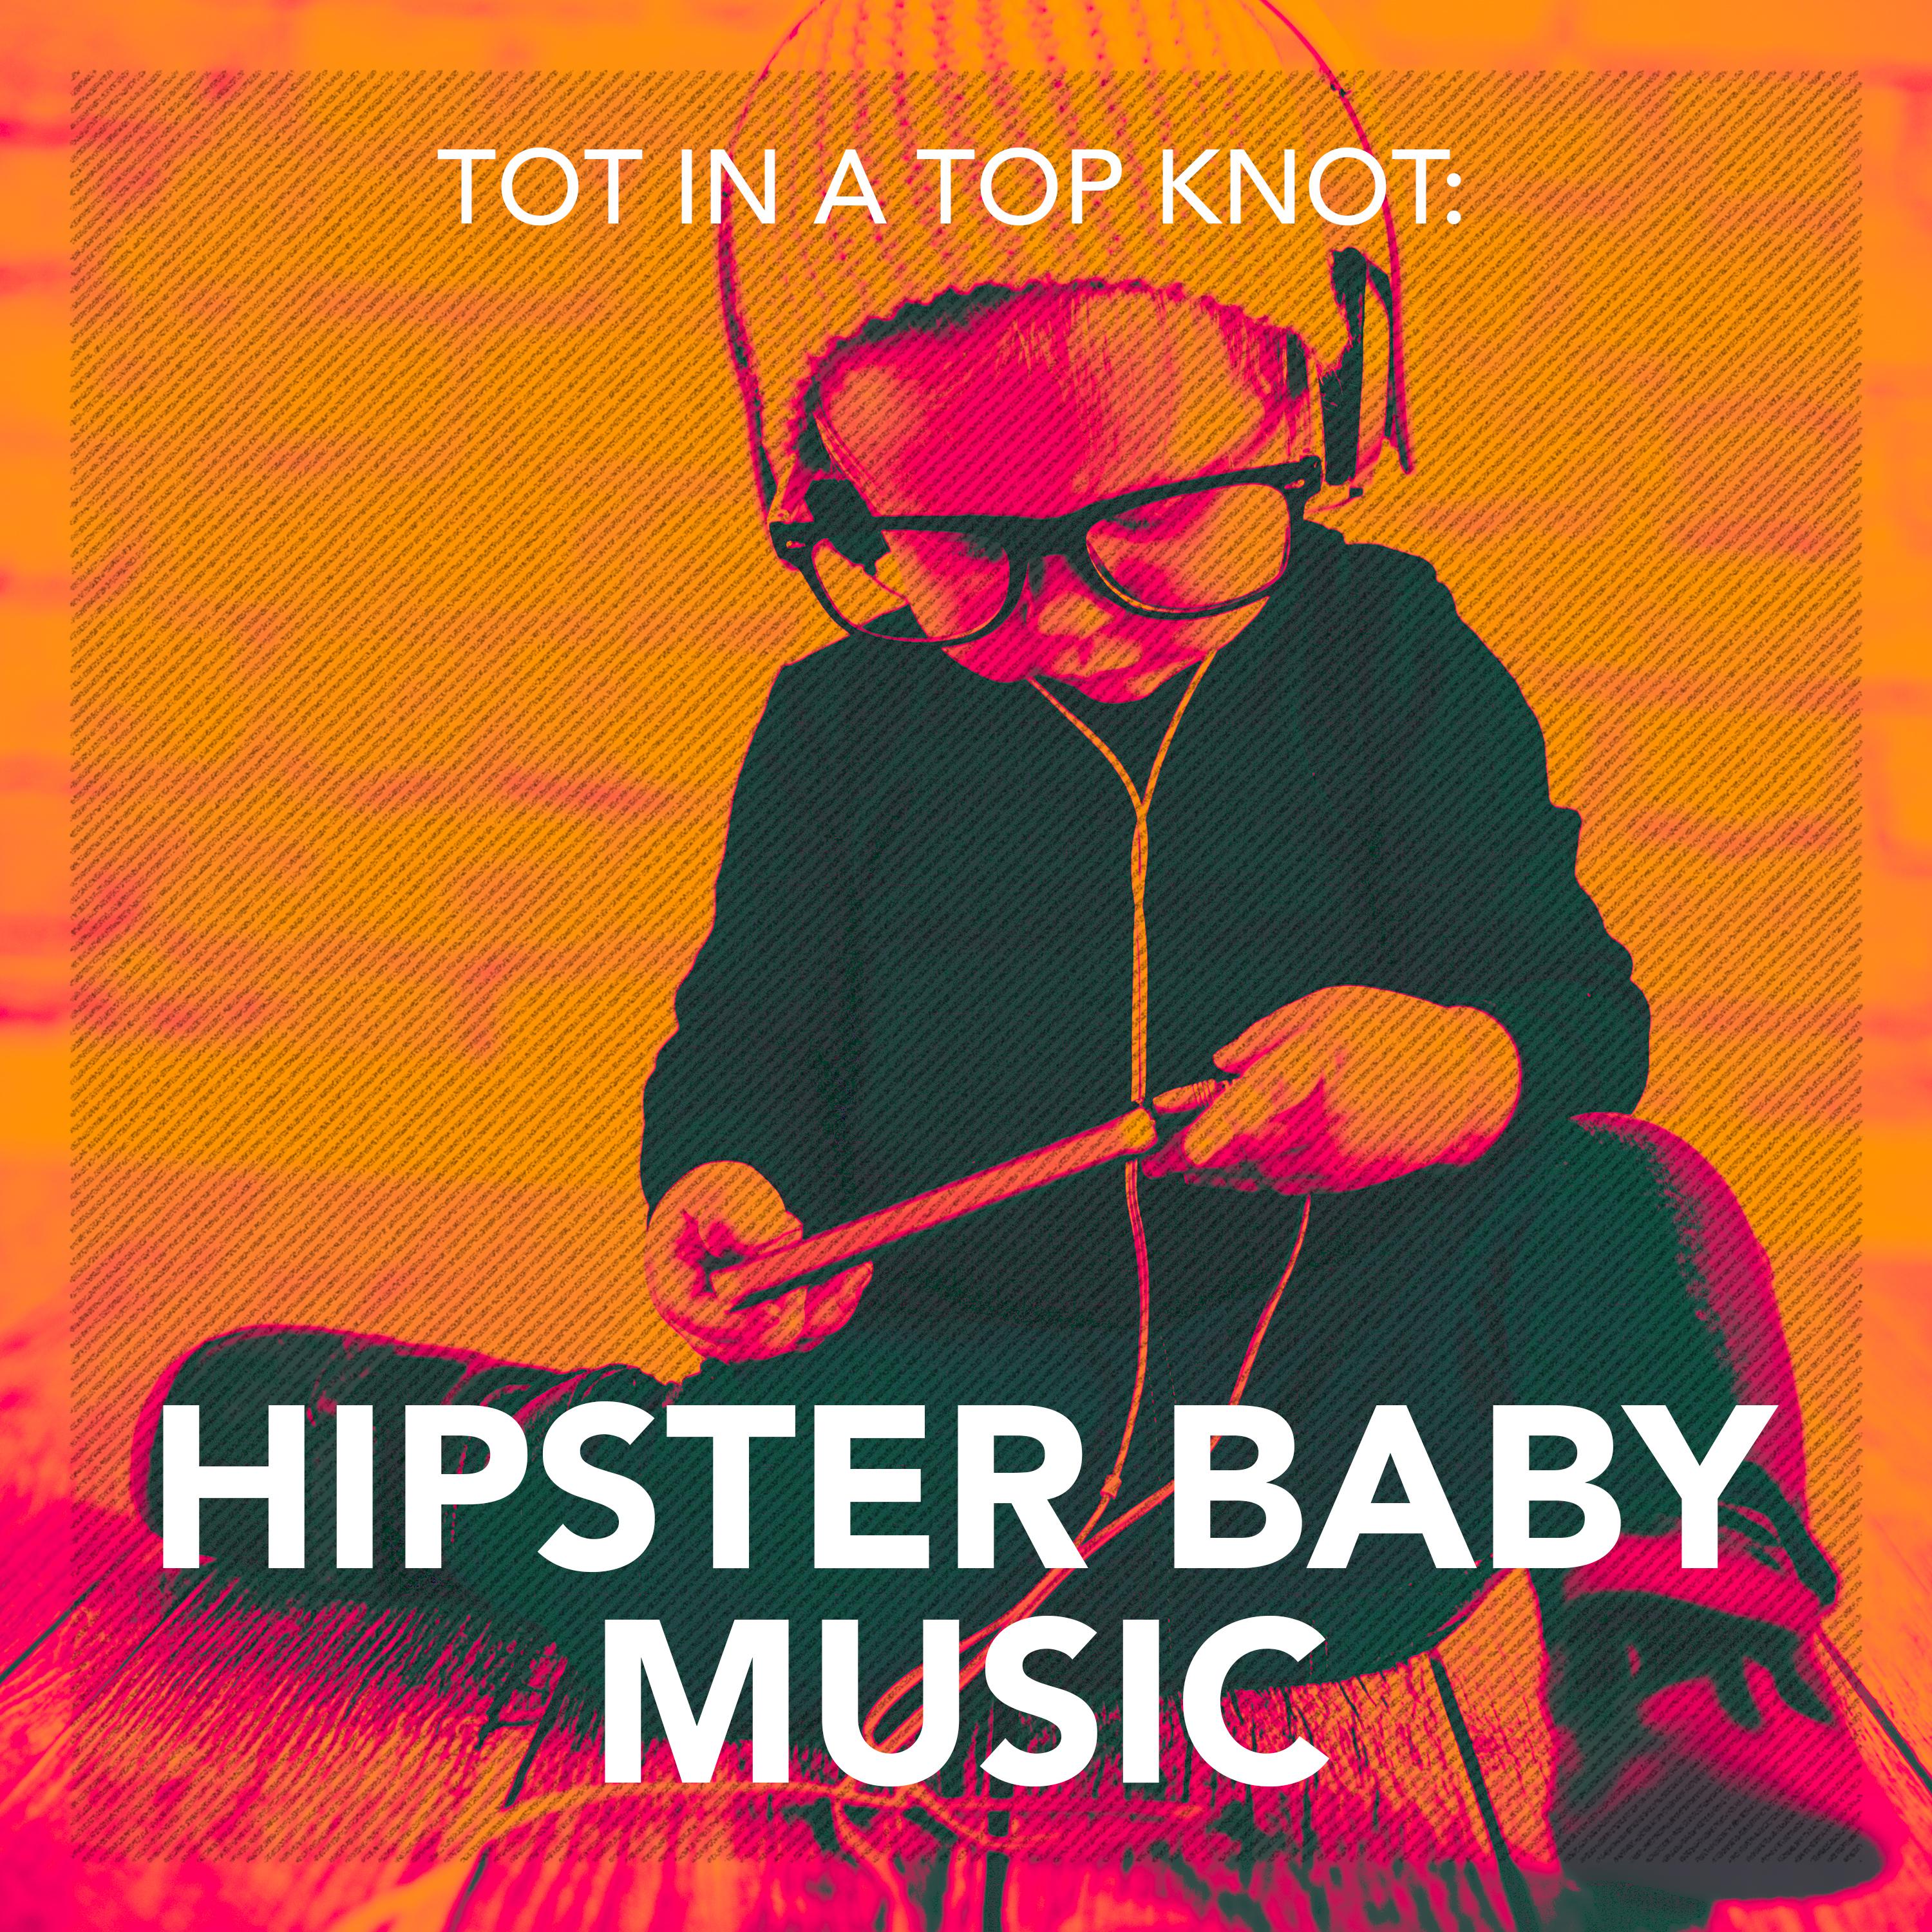 Tot in a Top Knot: Hipster Baby Music